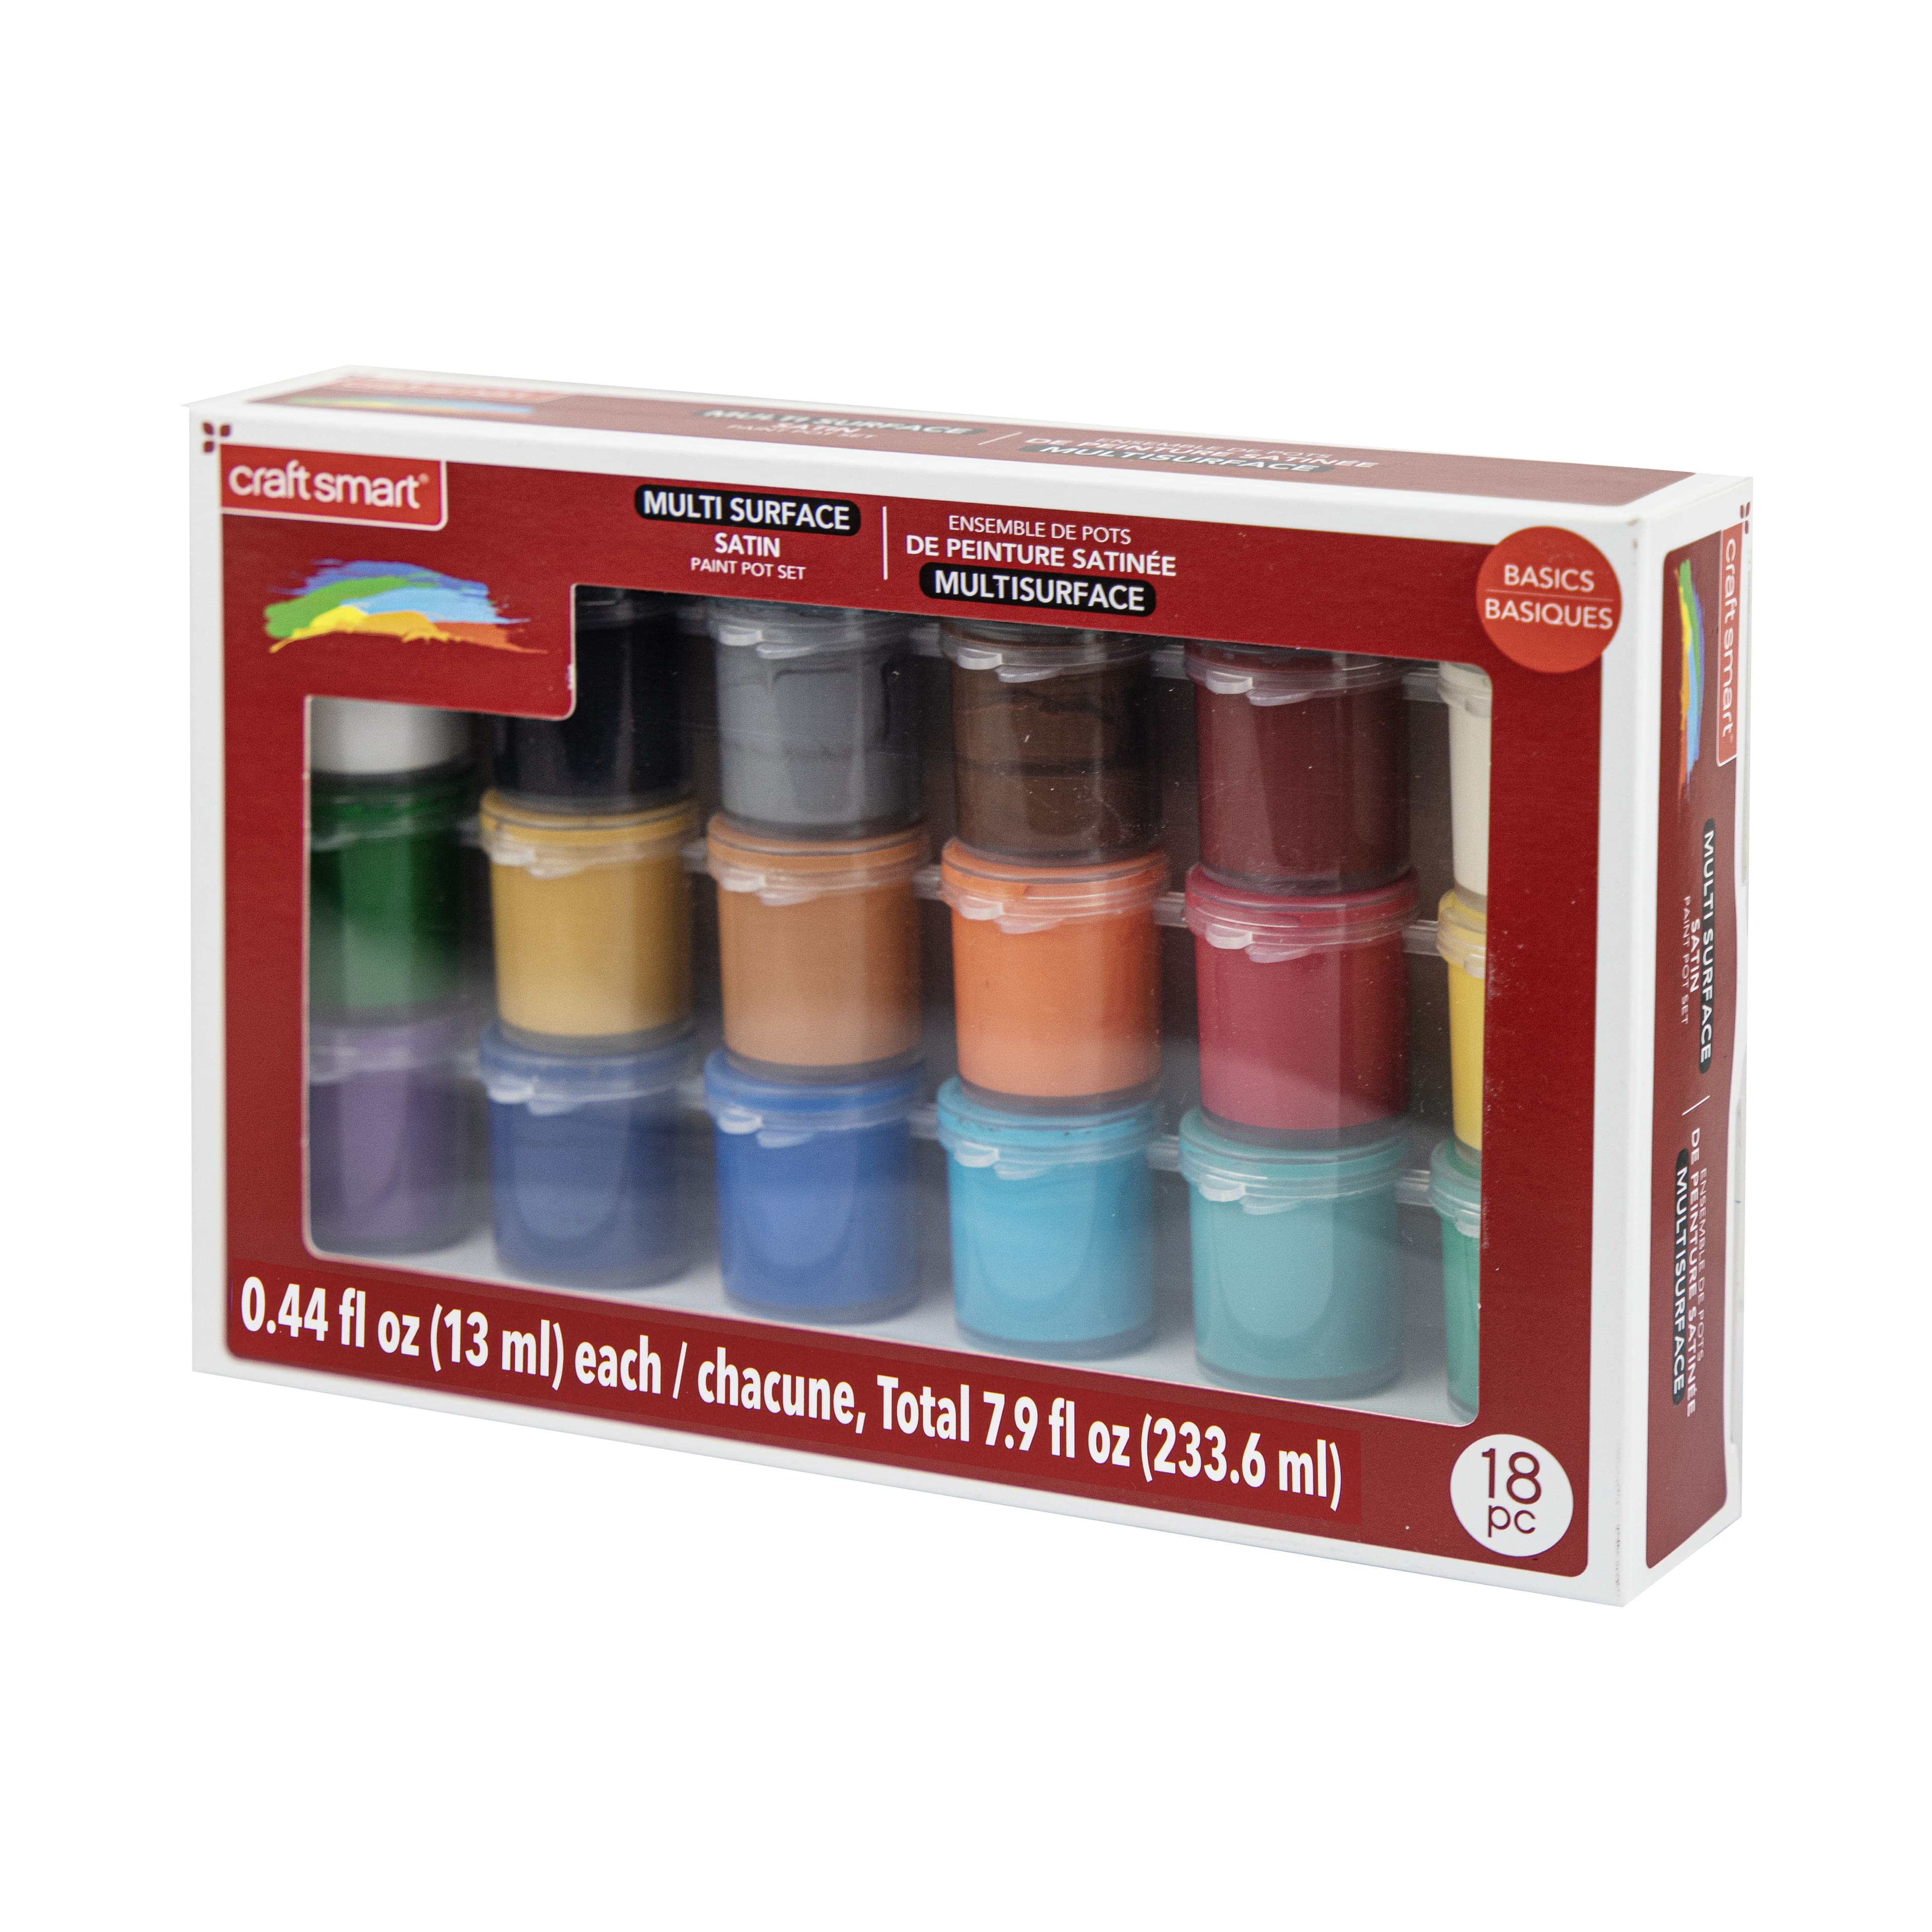 Primary Acrylic Paint Value 4 Piece Set by Craft Smart®